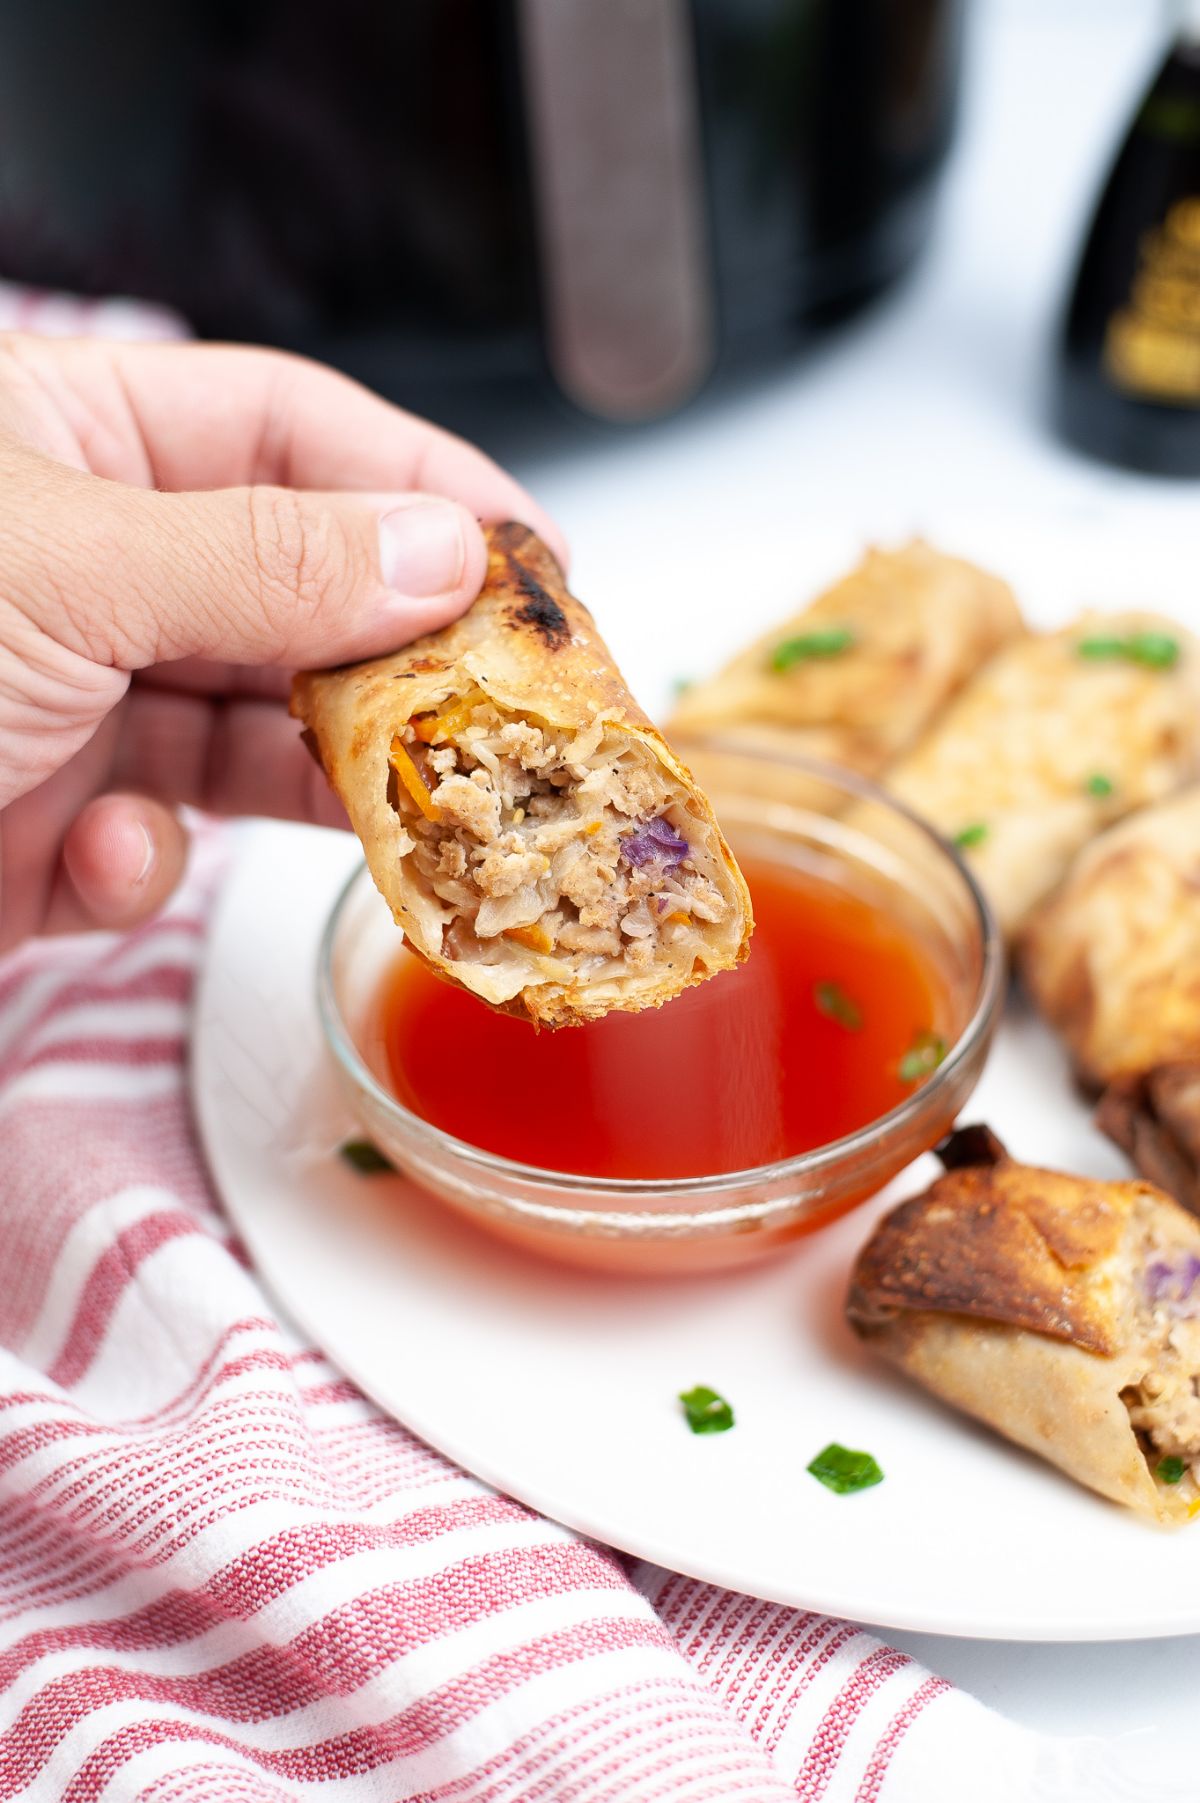 A hand holding a piece of Air Fryer Chicken Egg Roll, ready to be dipped in a sauce.